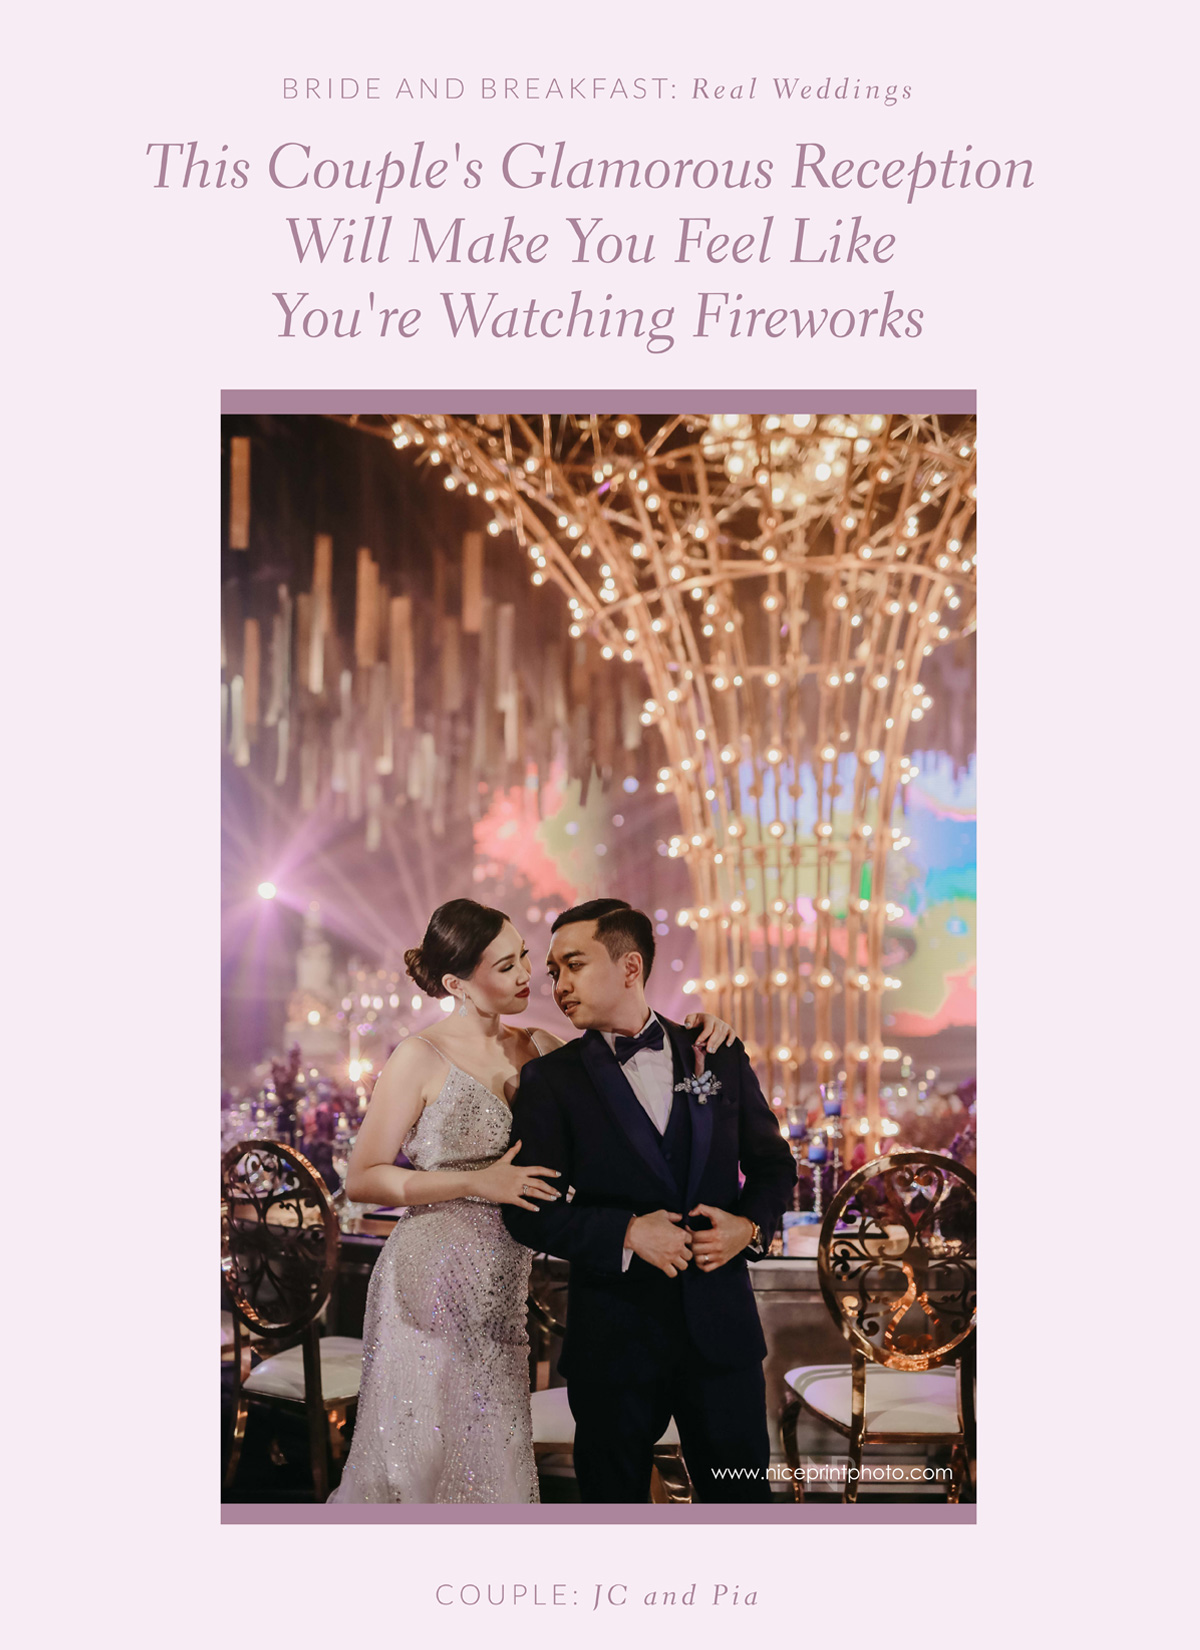 This Couple's Glamorous Reception Will Make You Feel Like You're Watching Fireworks